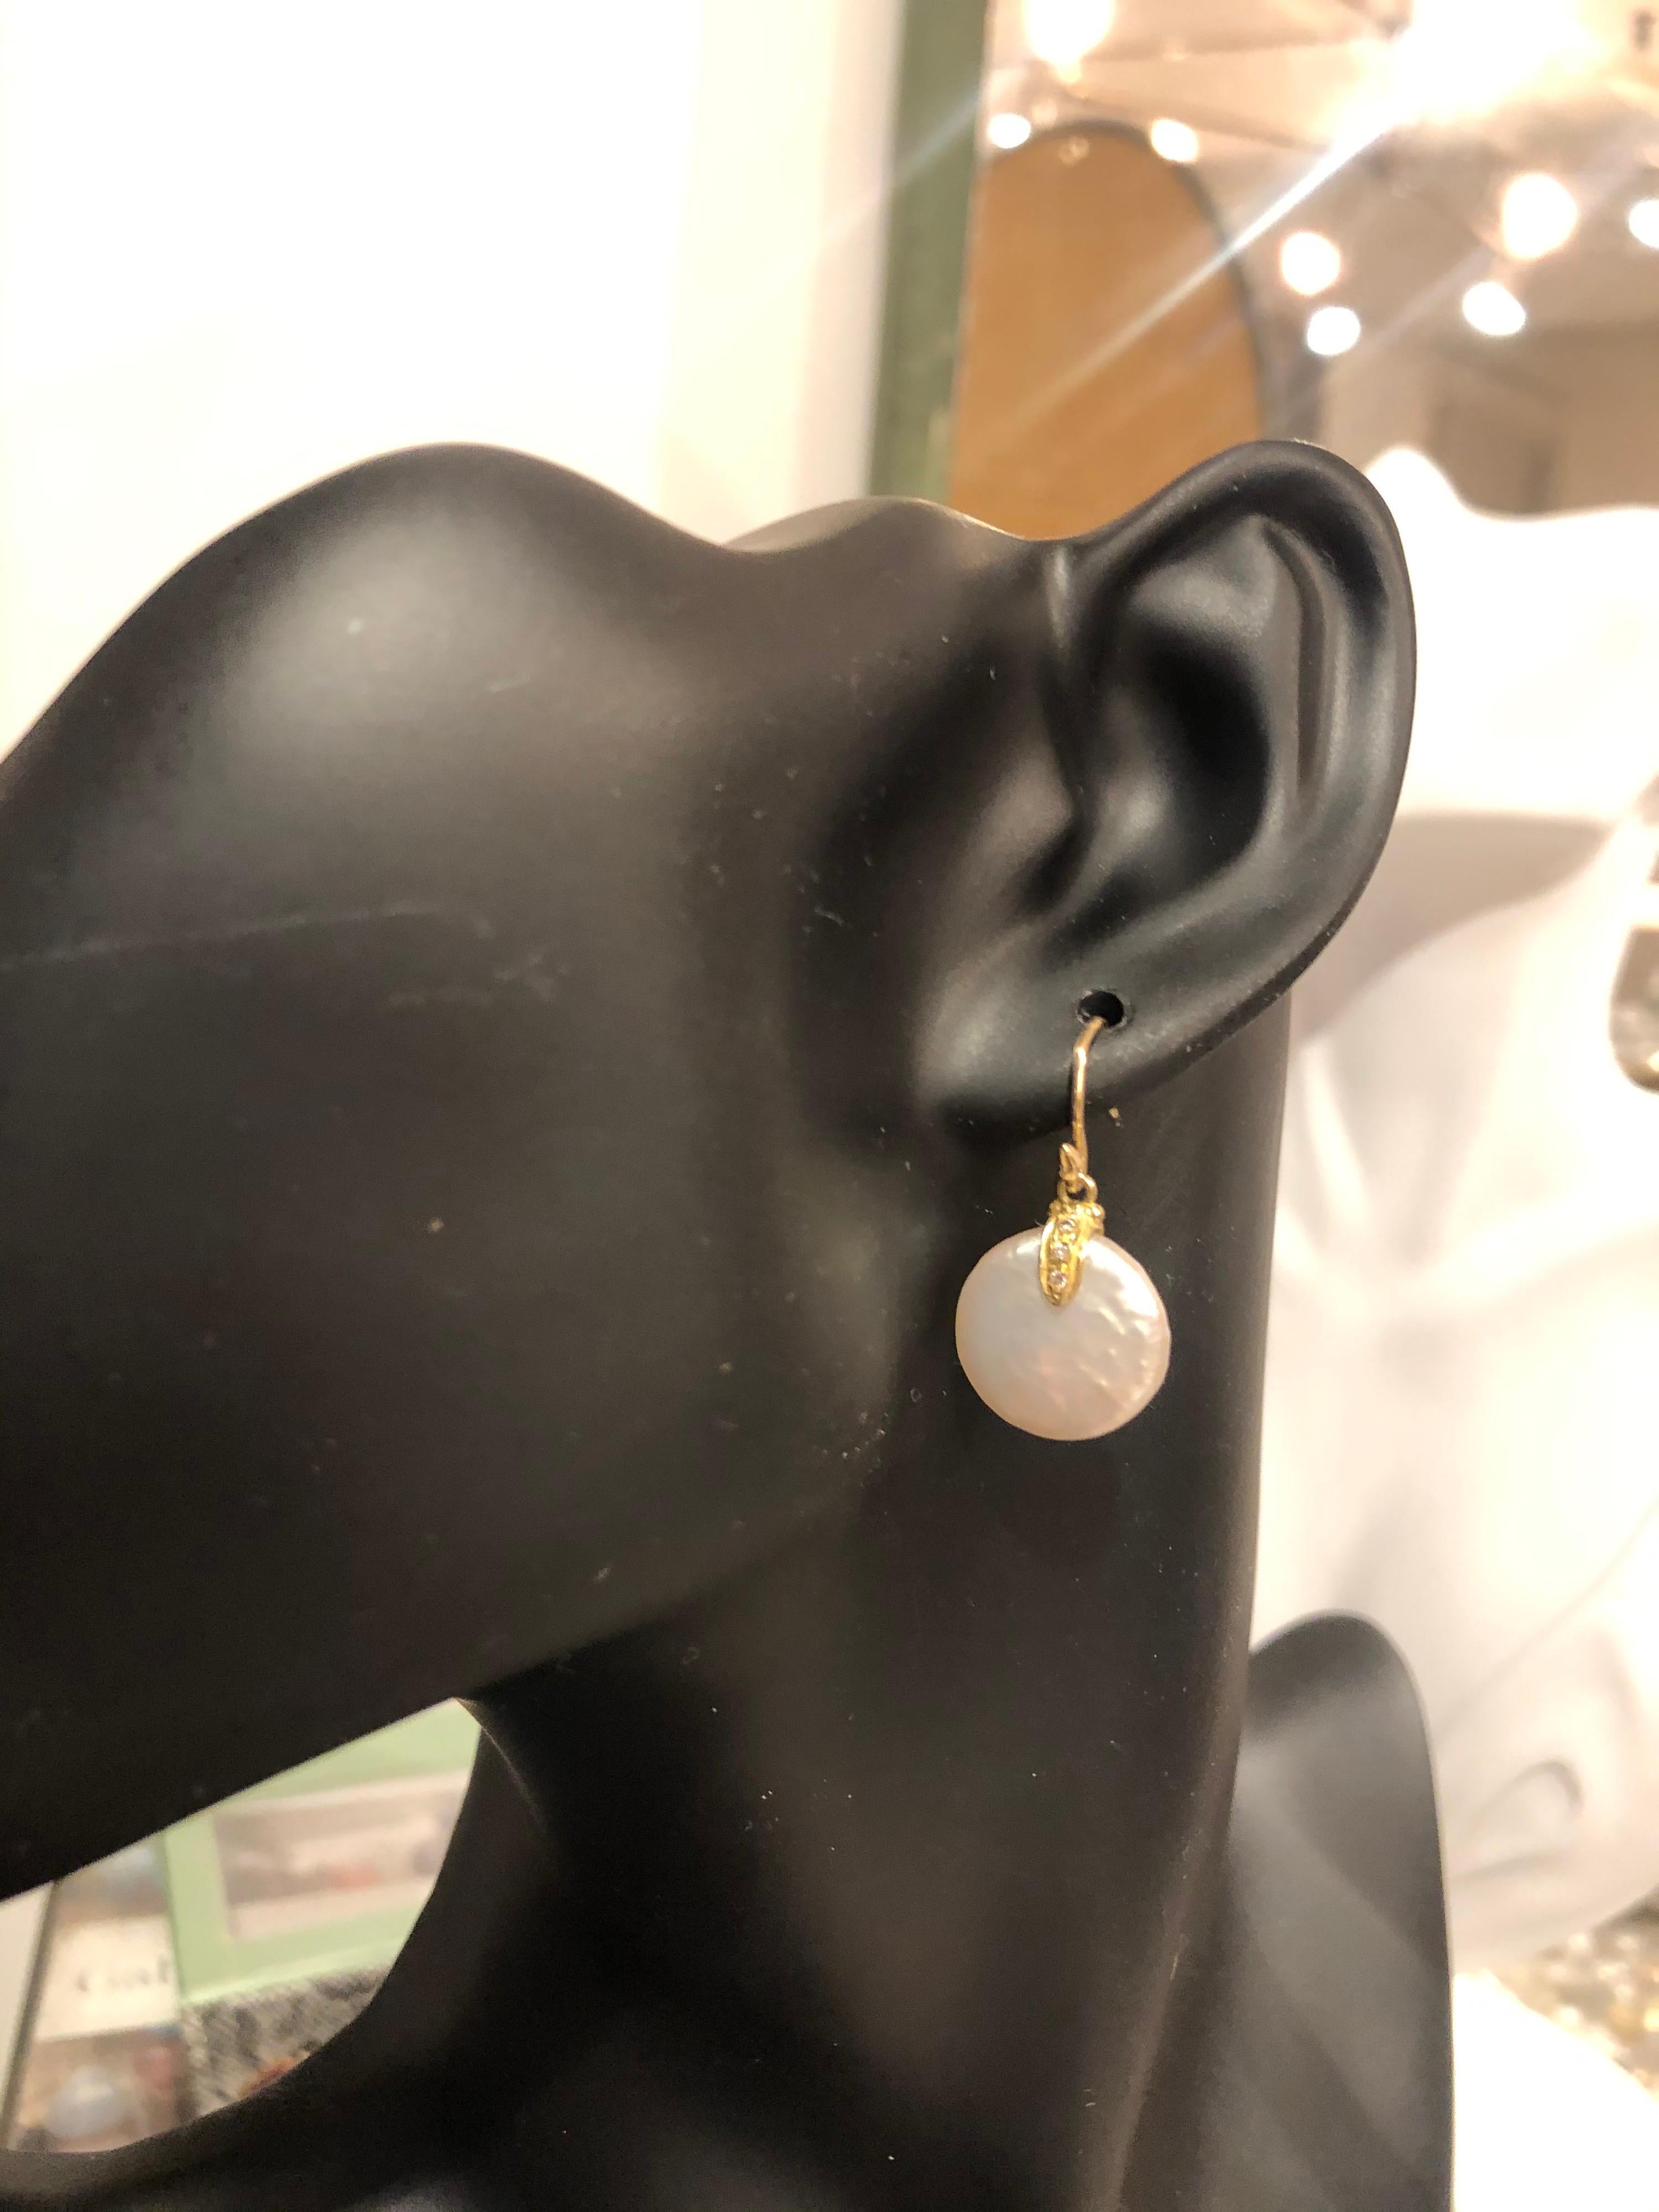 Perfect white freshwater coin pearls dangle from a diamond-pavé seed setting on a single-seed earwire. This is a forever-classic earring, one Gabrielle made famous.